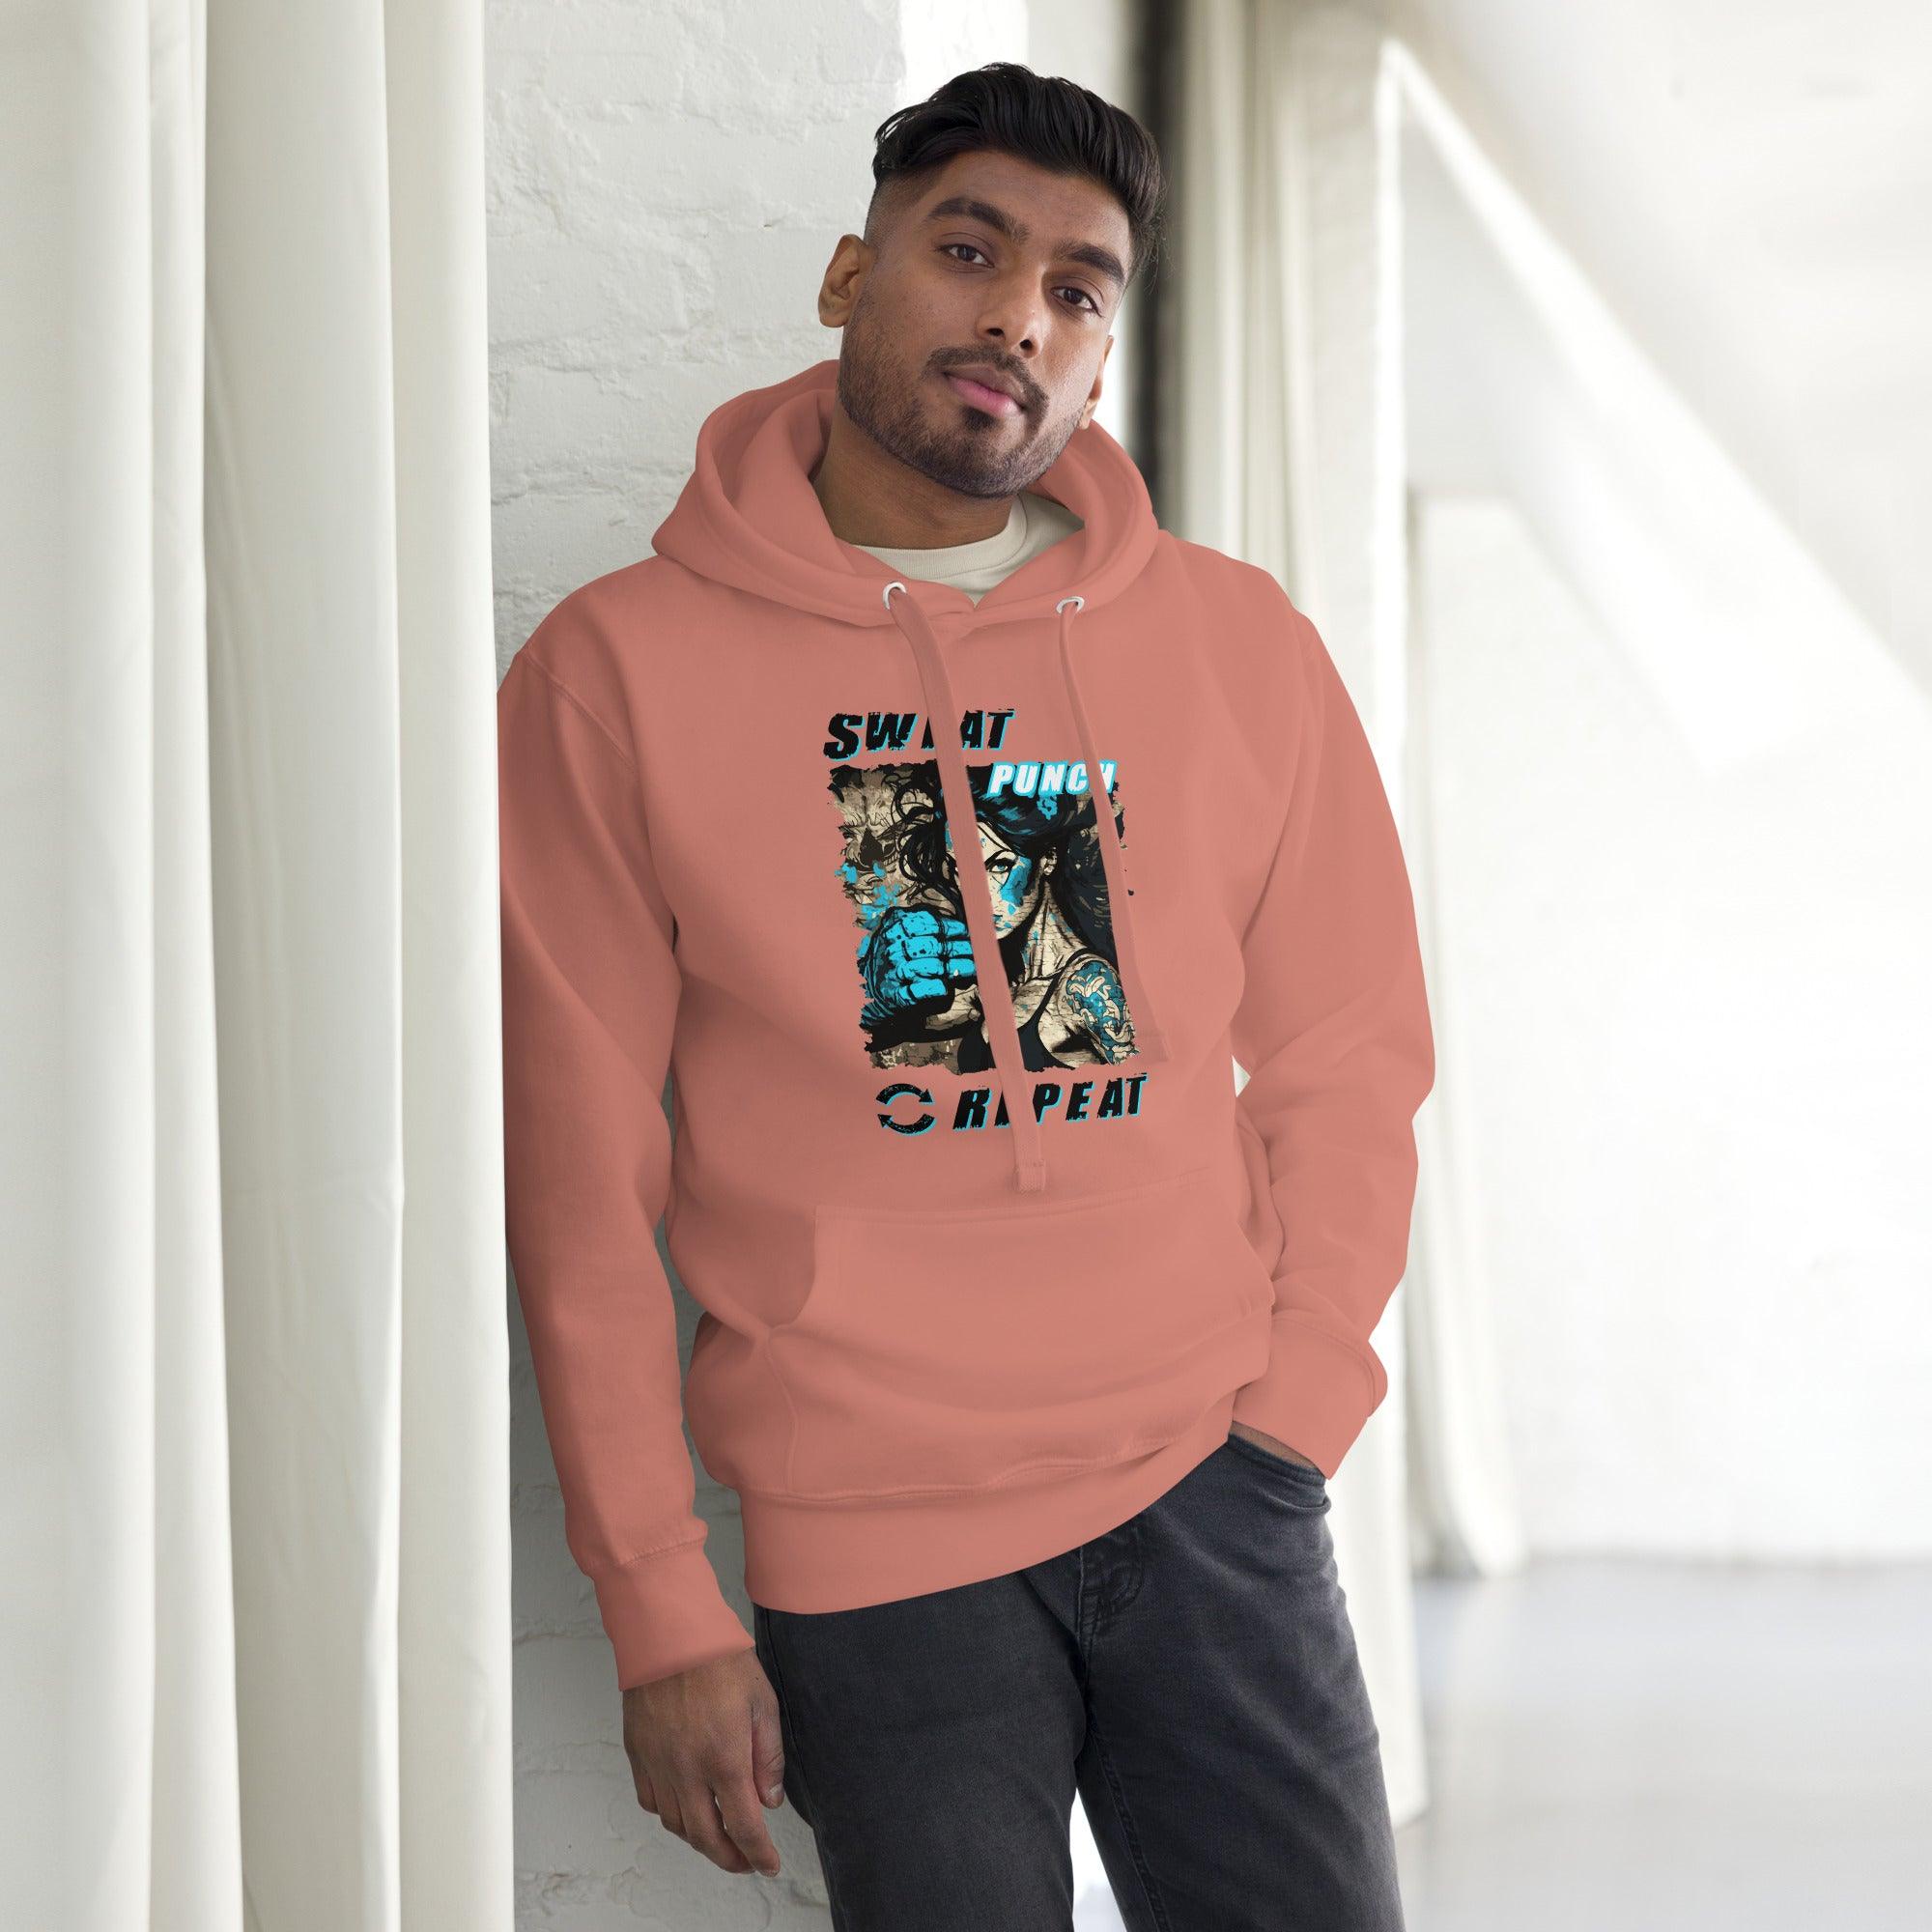 Sweat Punch Repeat Unisex Hoodie - Beyond T-shirts